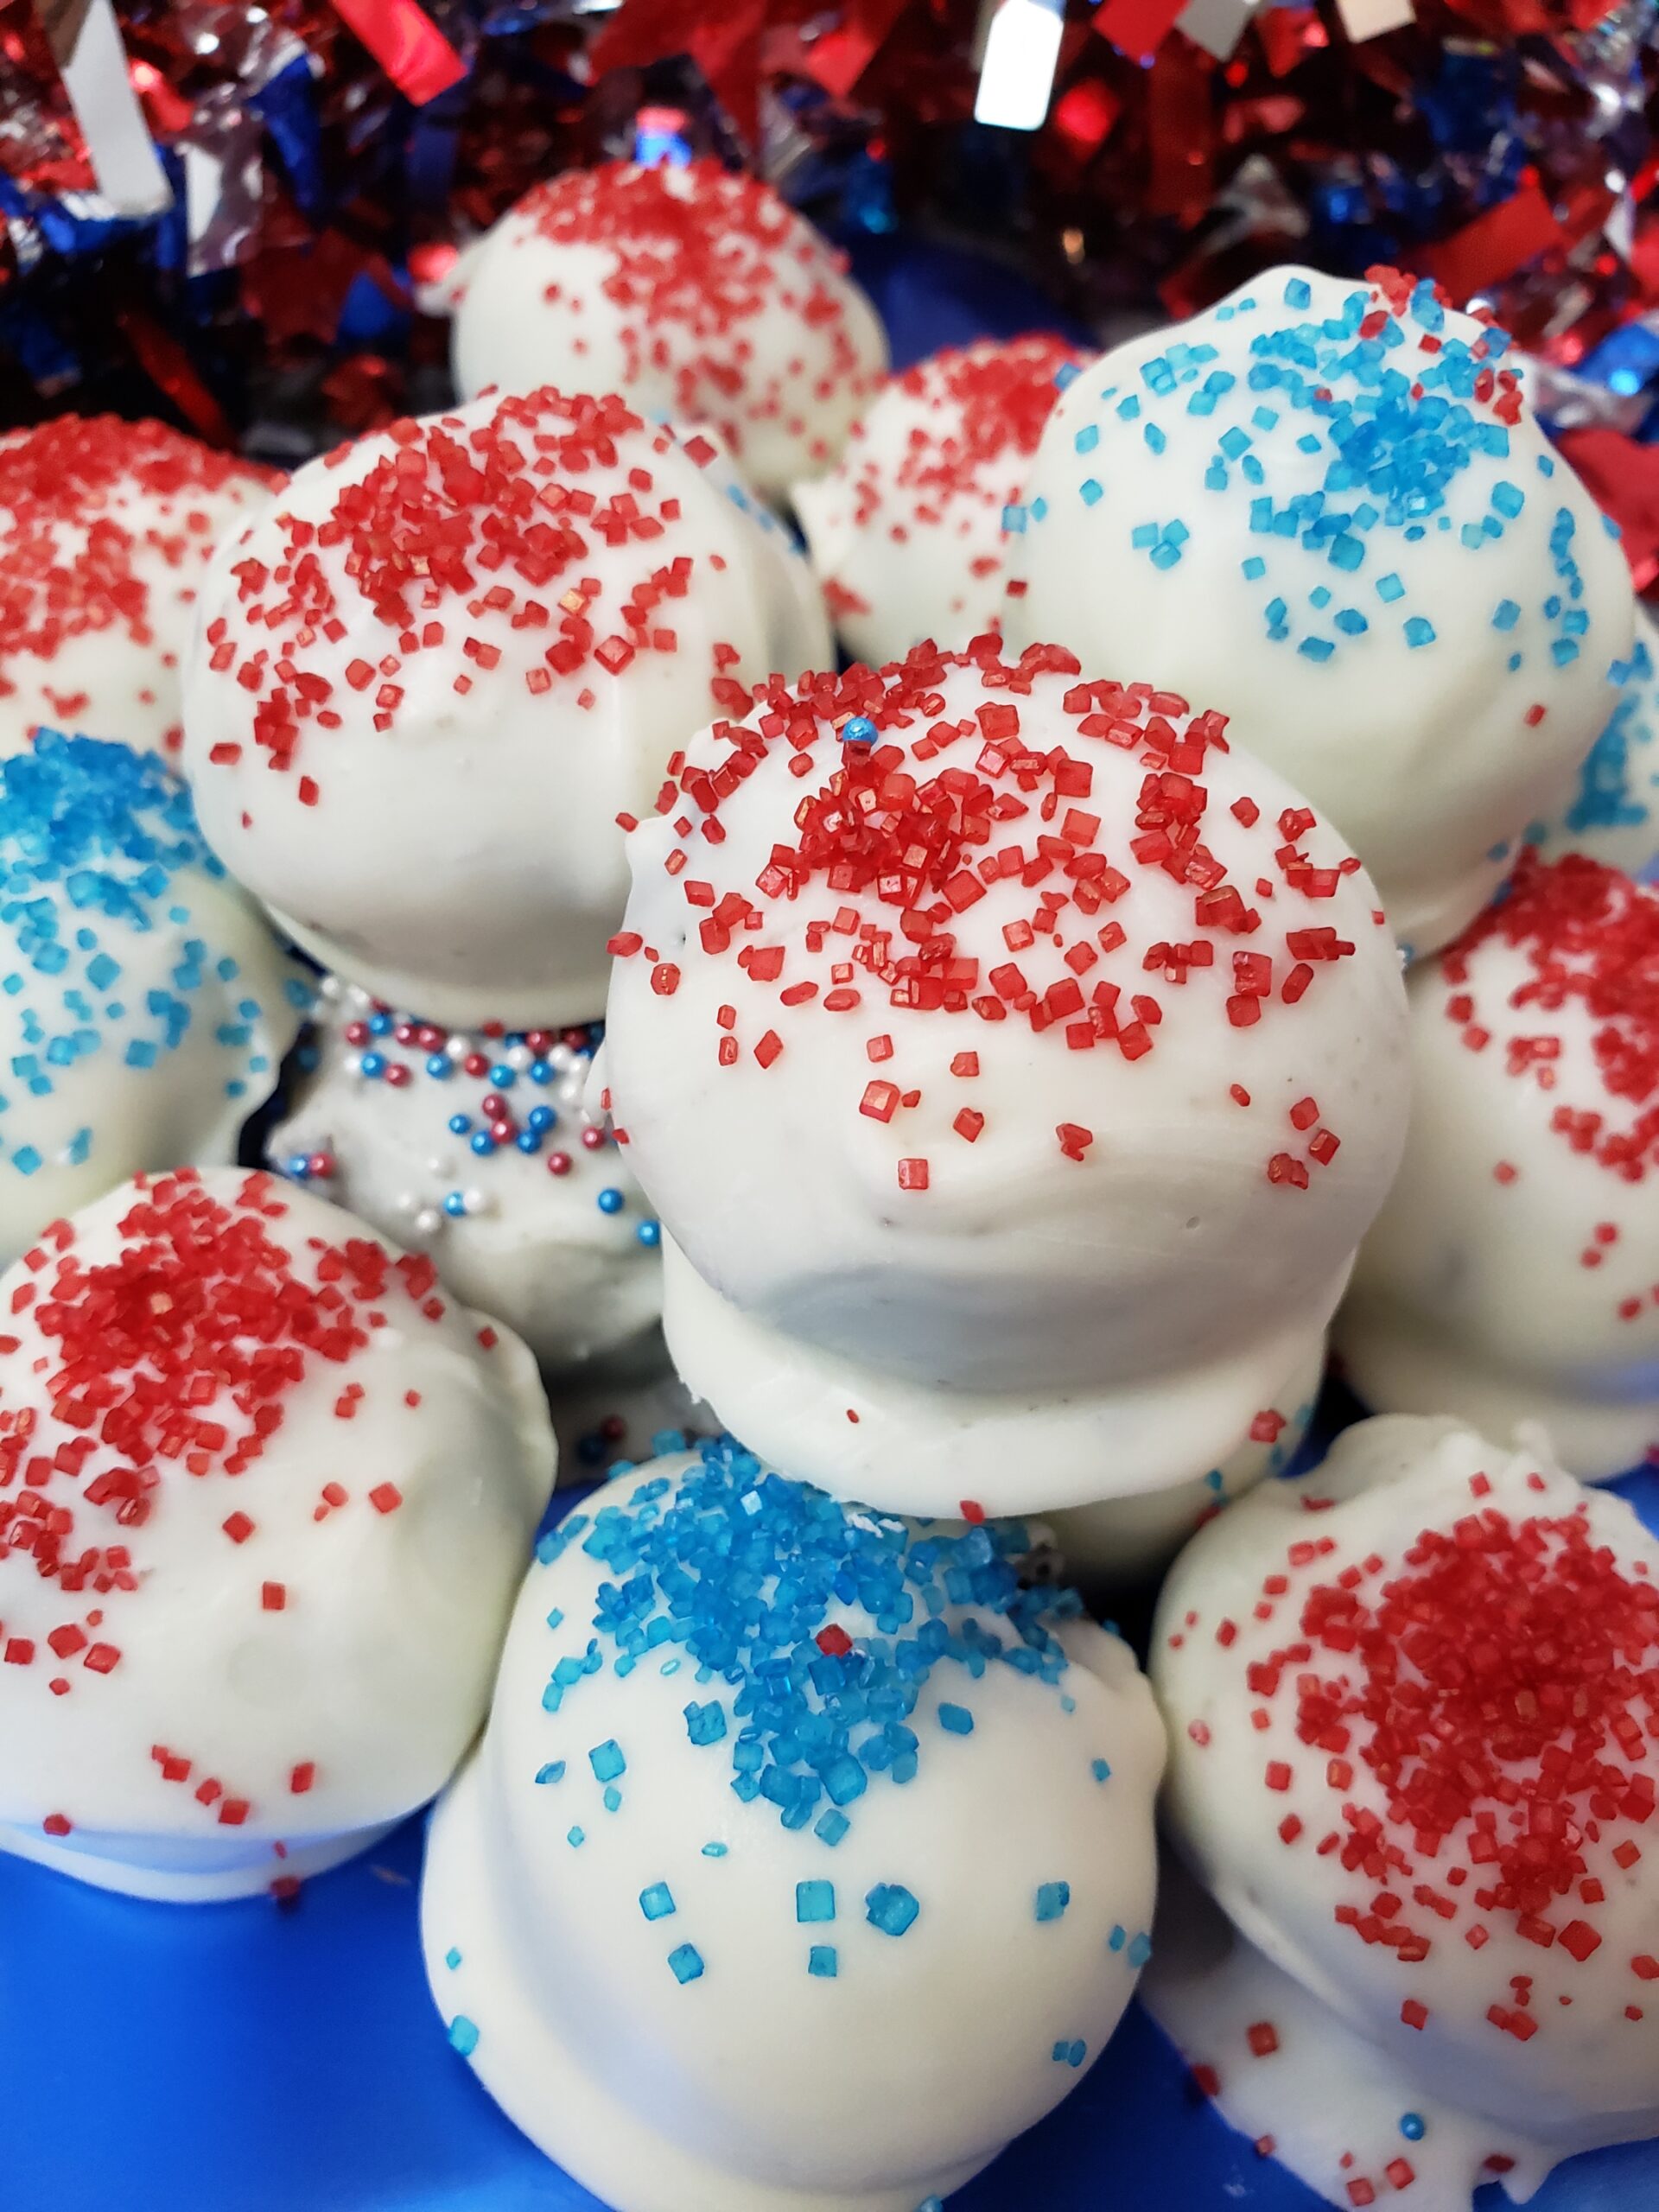 Patriotic truffles piled on a blue plate.